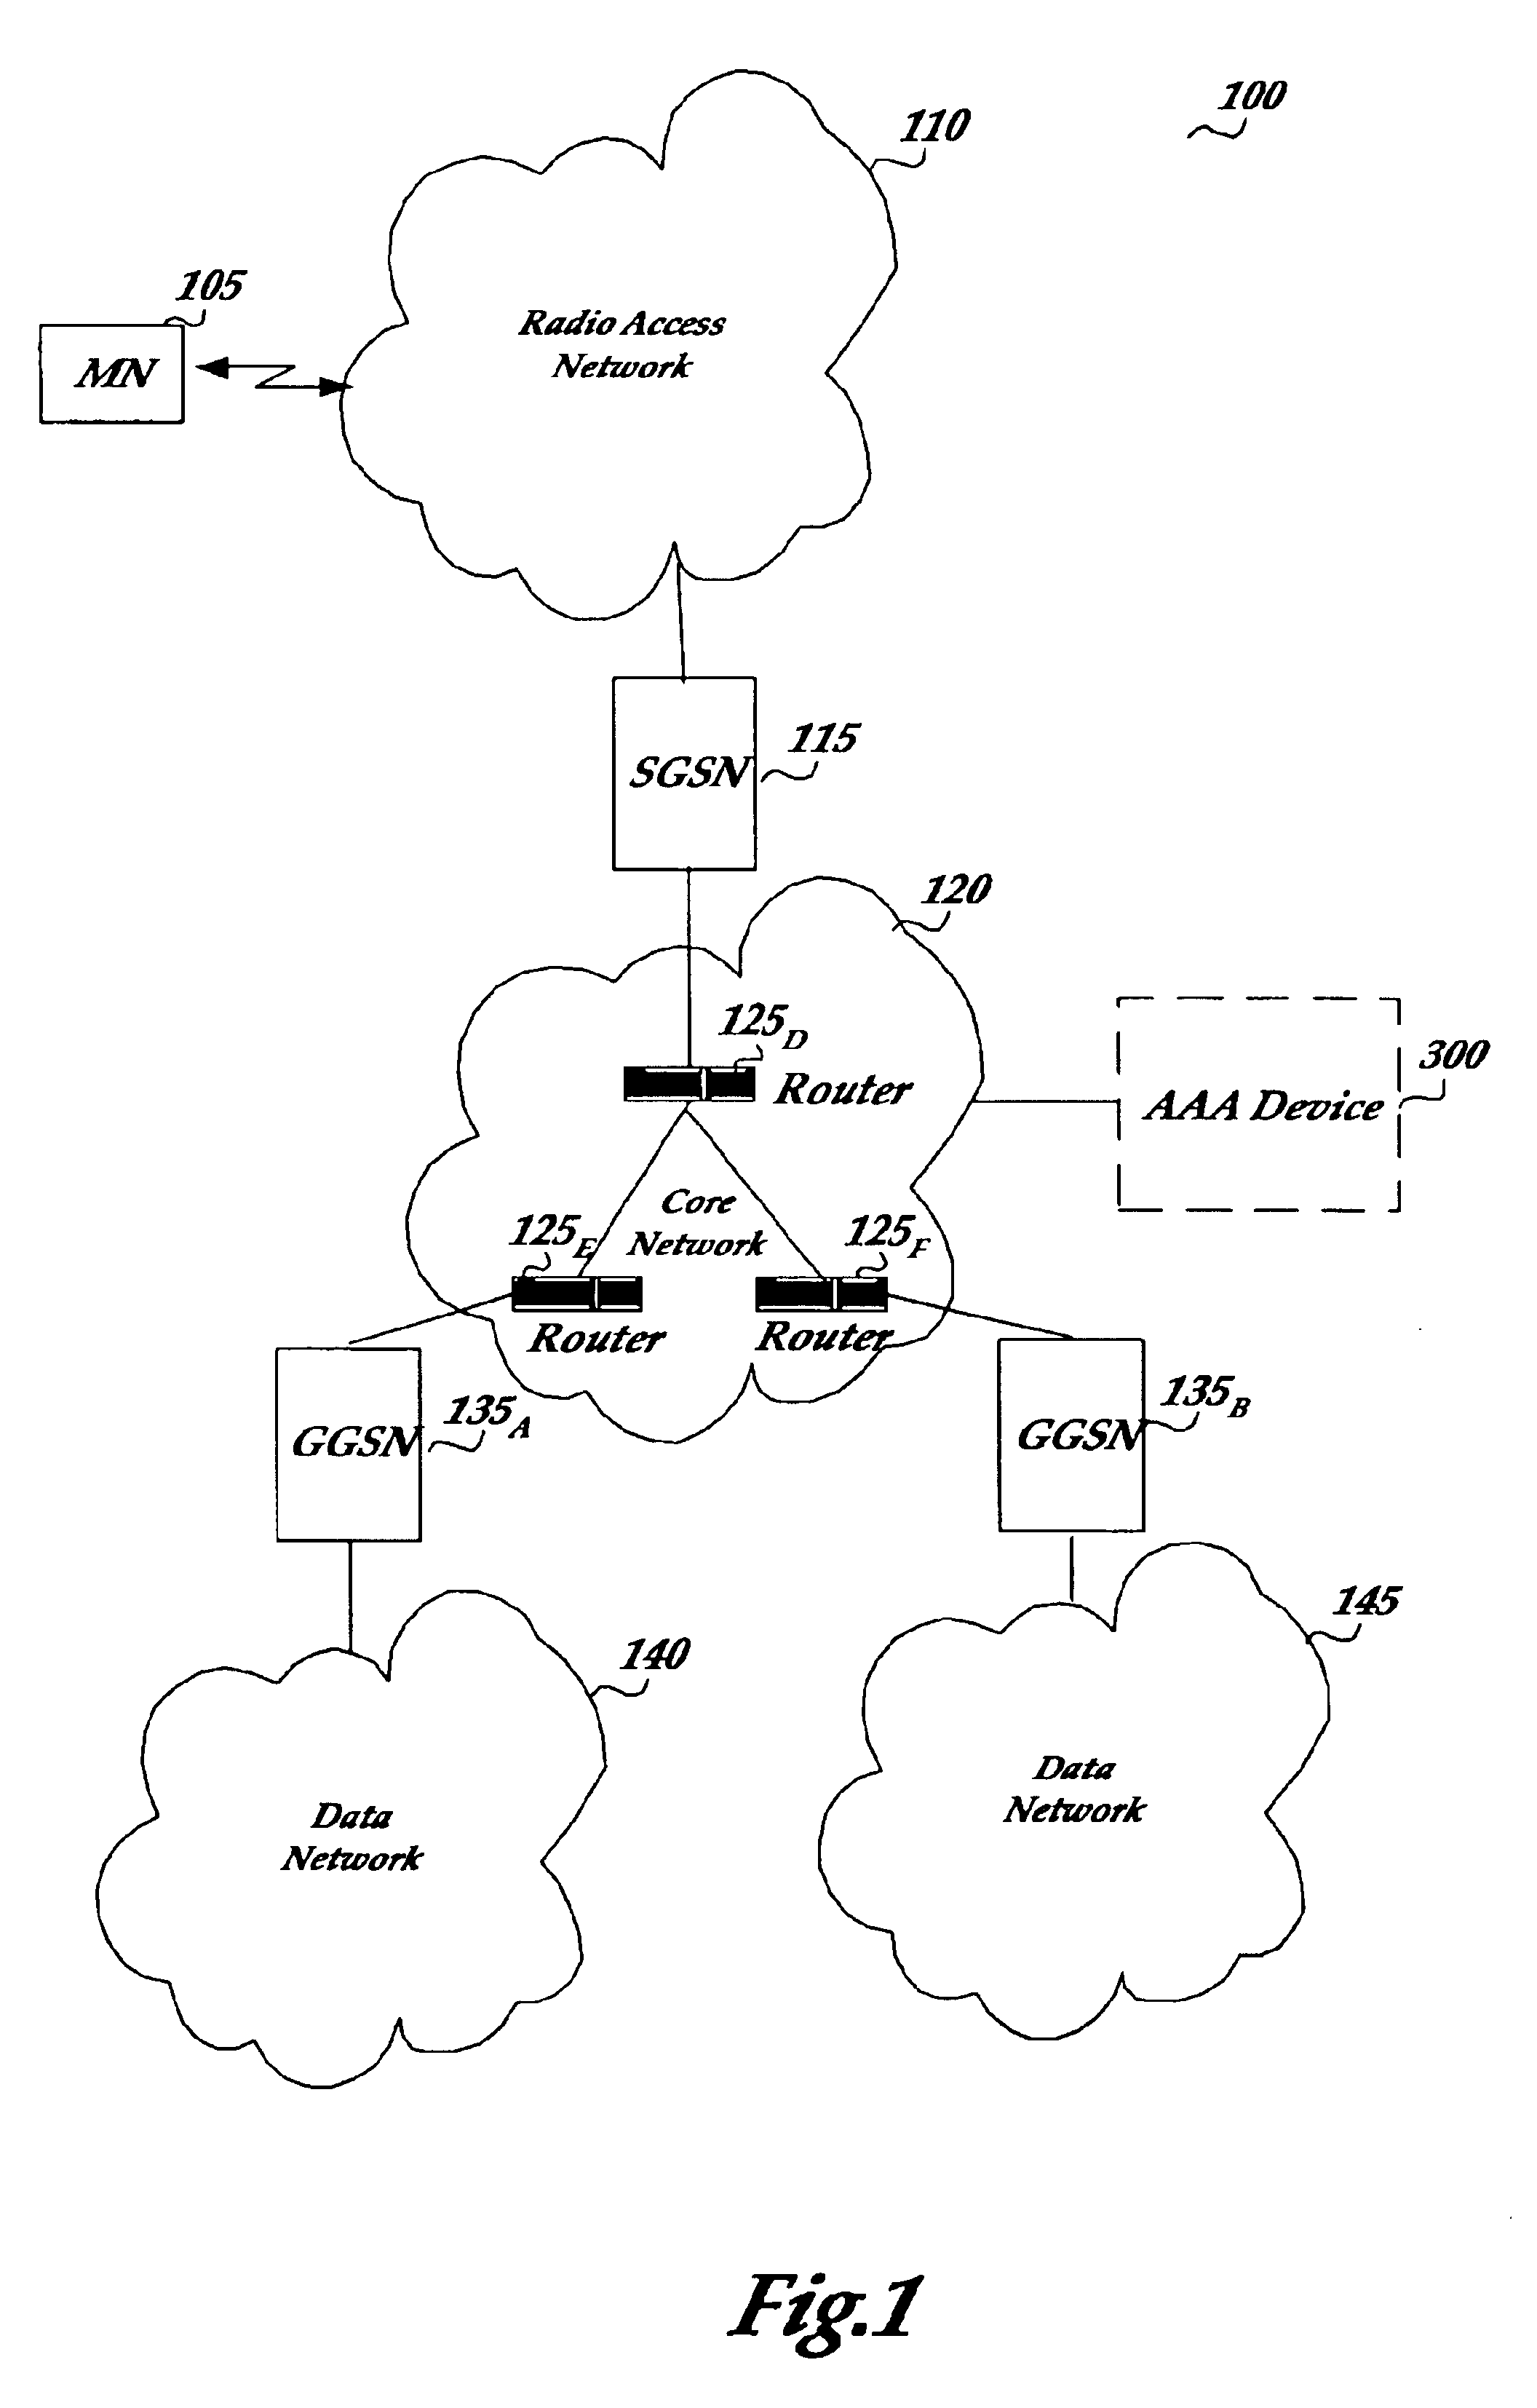 Ad hoc networking of terminals aided by a cellular network